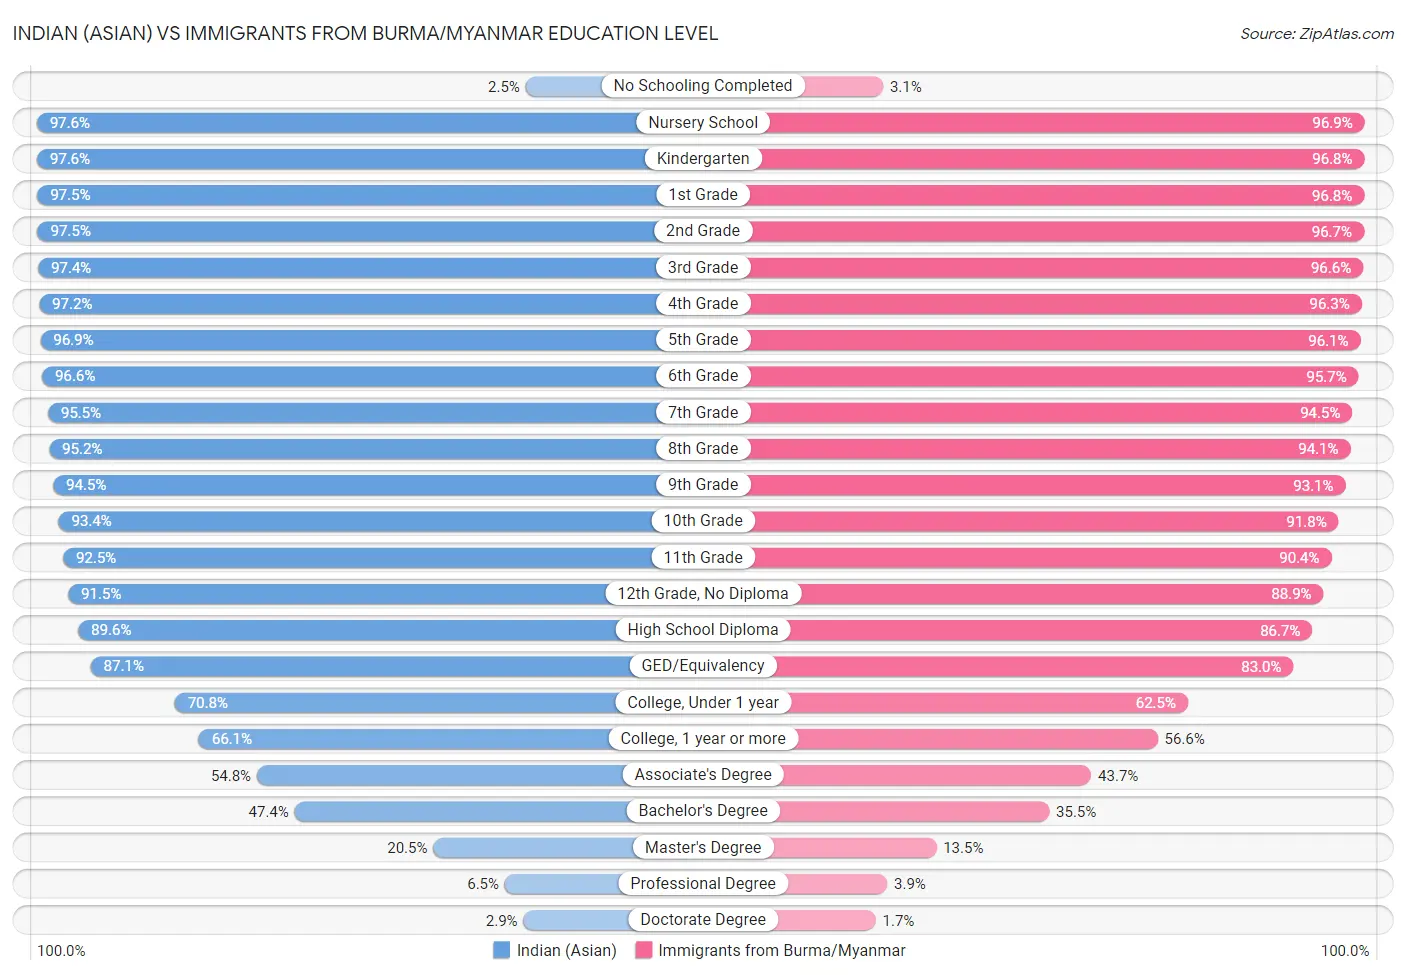 Indian (Asian) vs Immigrants from Burma/Myanmar Education Level